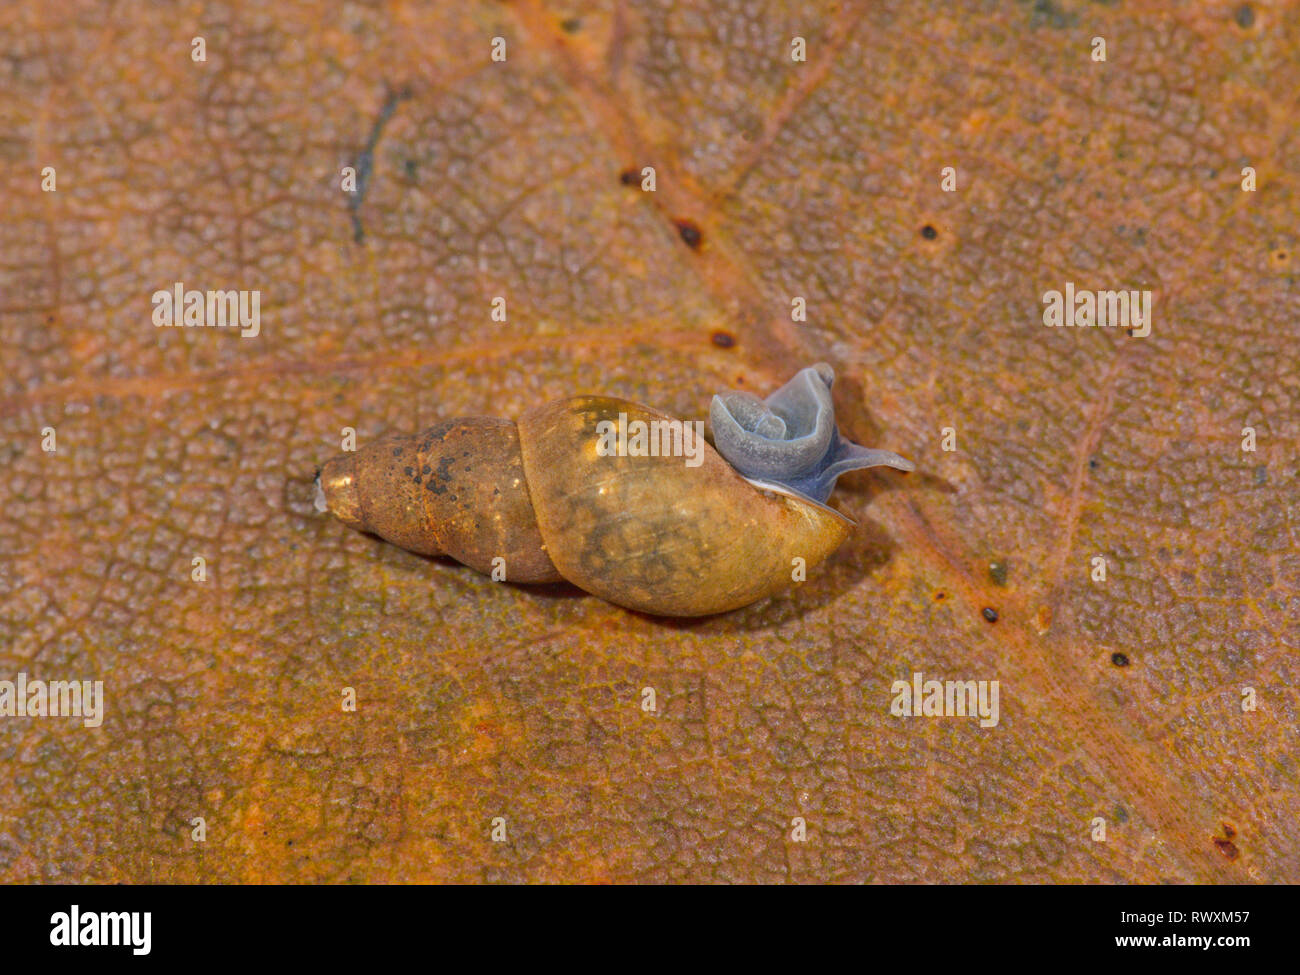 Pond Mud Snail (Omphiscola glabra) emerging. Sussex, UK. 2 of 3 Stock Photo